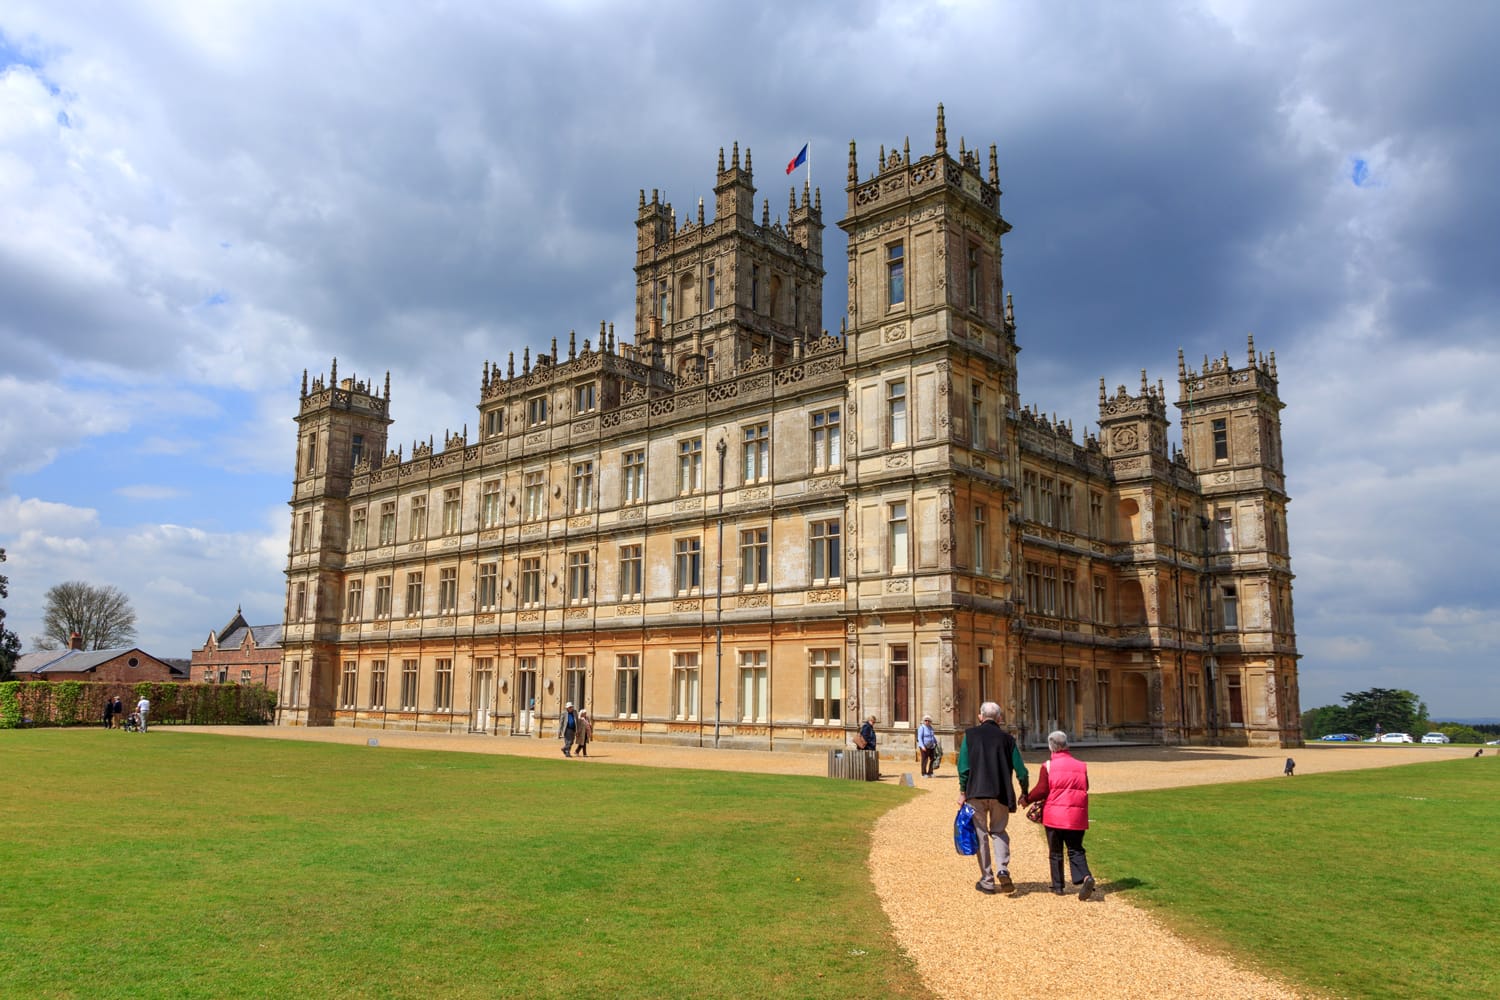 Highclere Castle. Jacobethan style country house, seat of the Earl of Carnarvon. Setting of Downton Abbey.